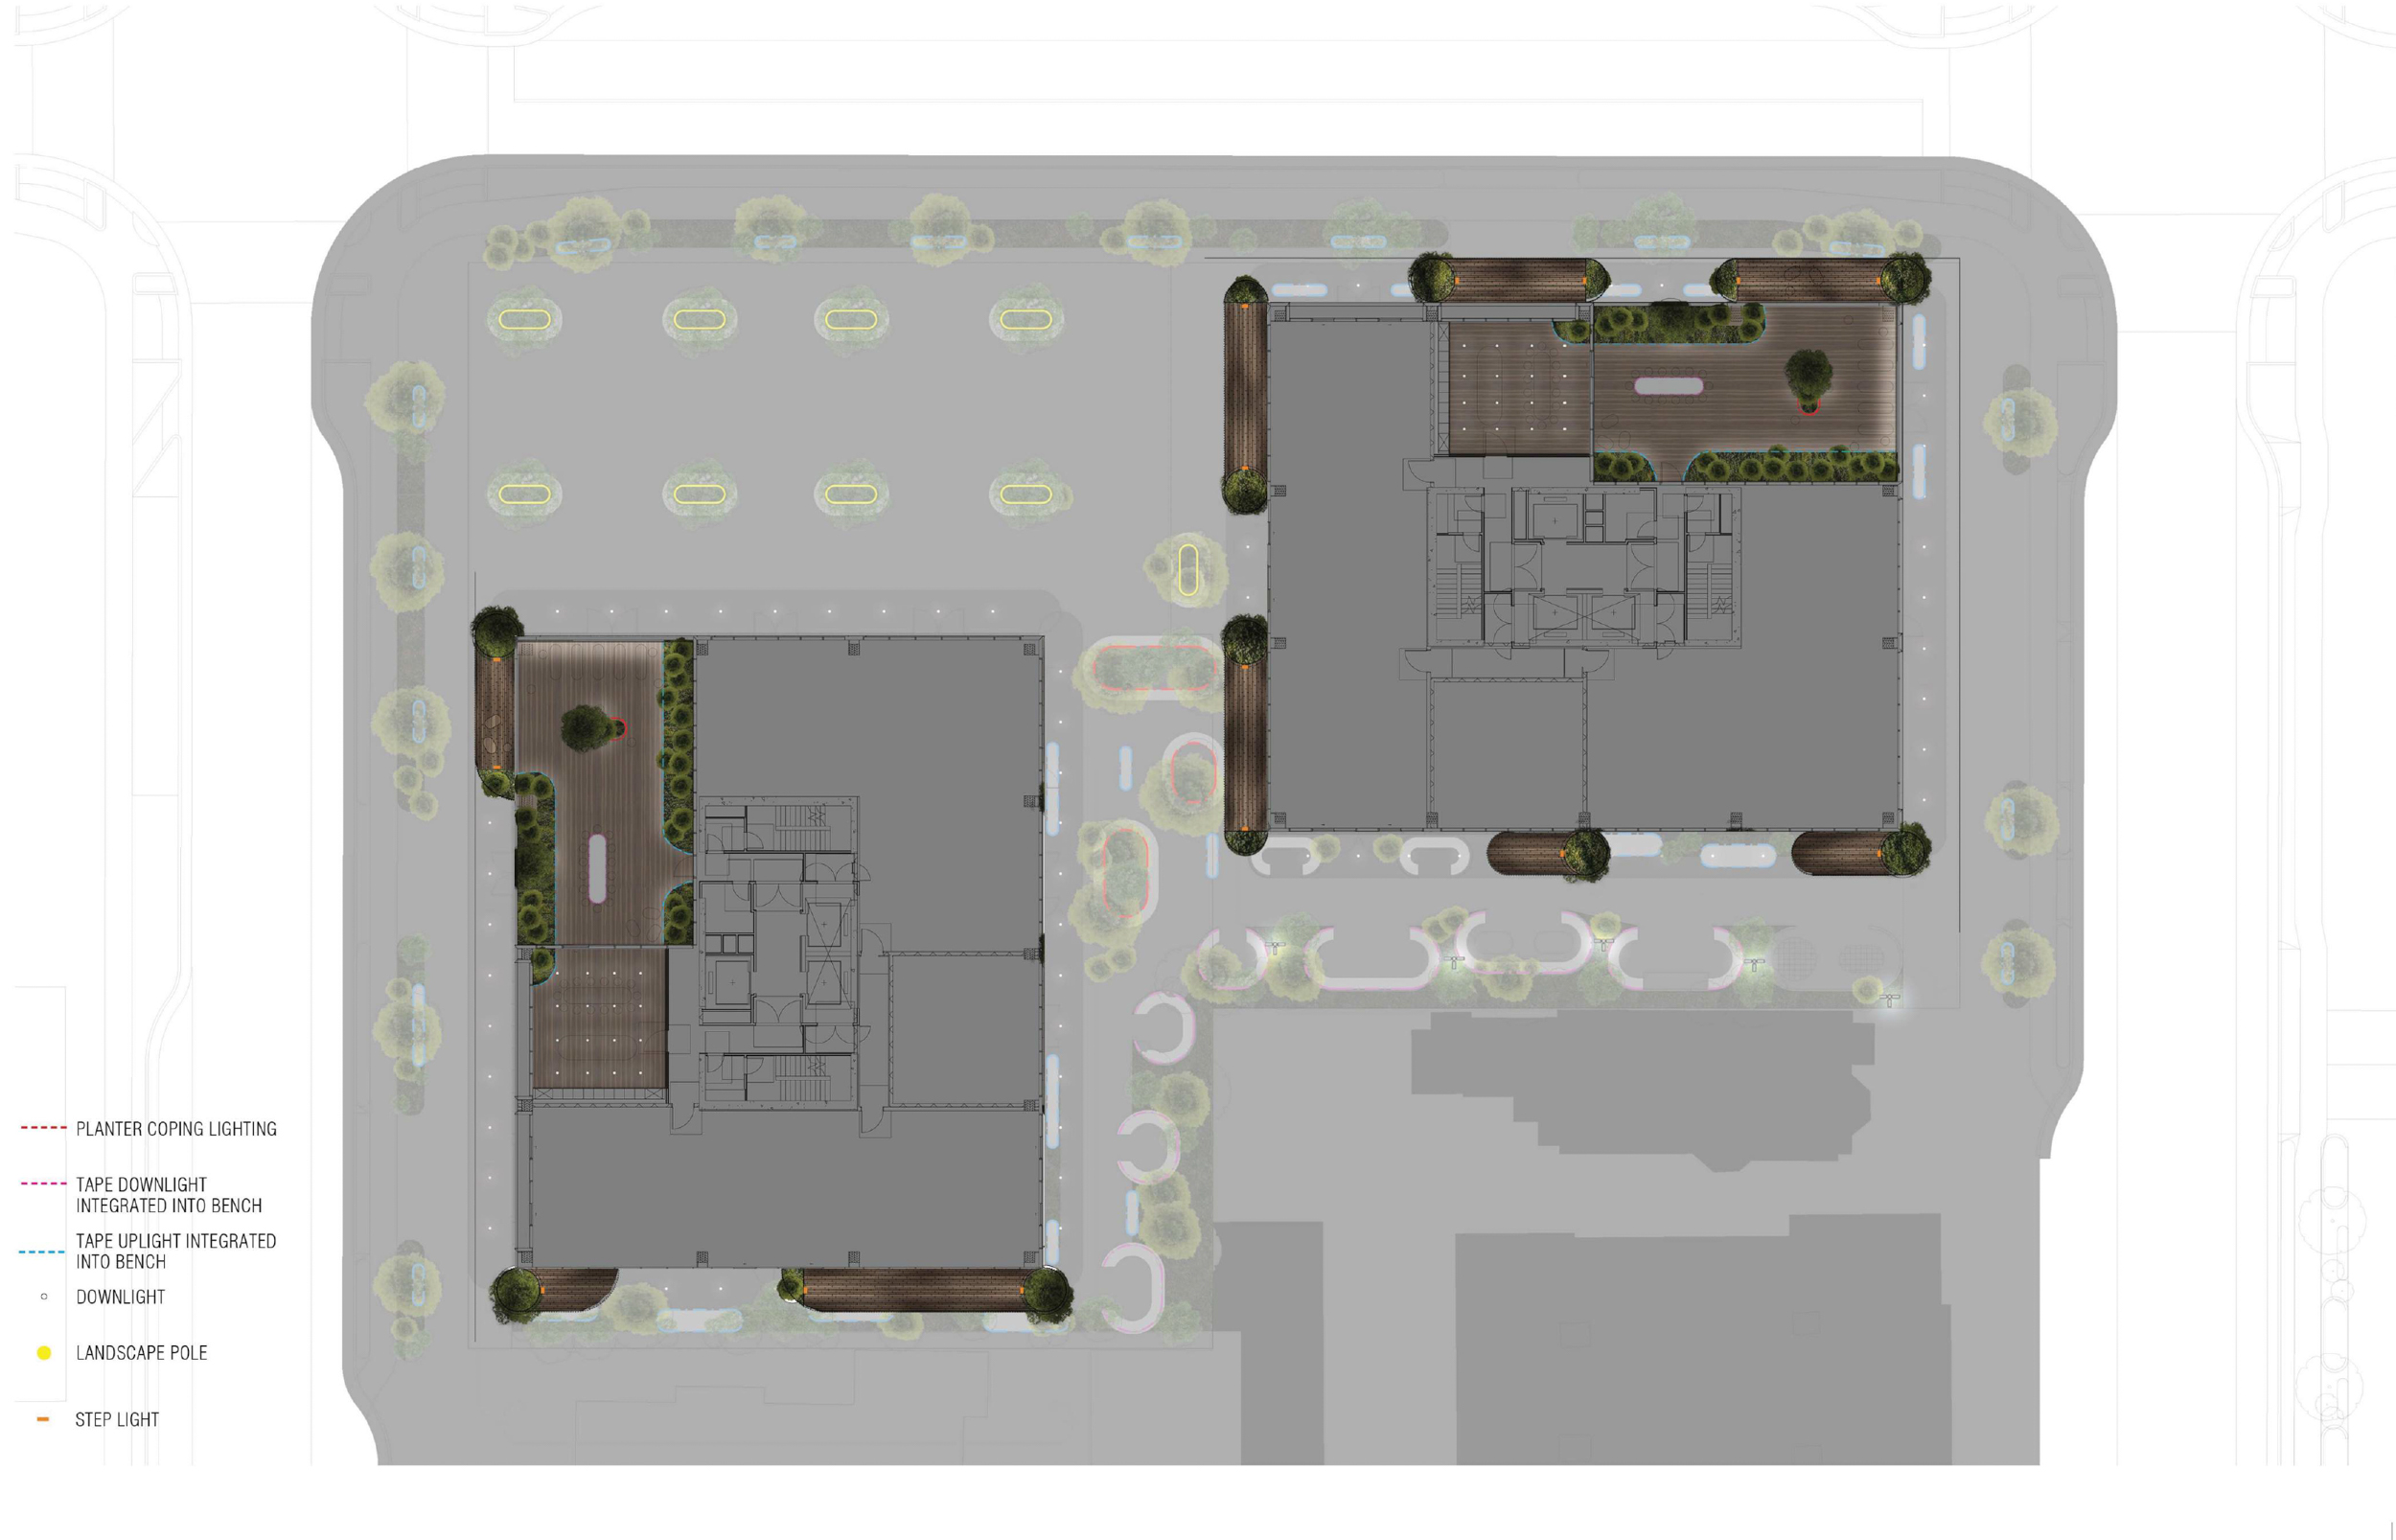 Nabr Tower A and B landscaping map, illustration by RMW Architecture